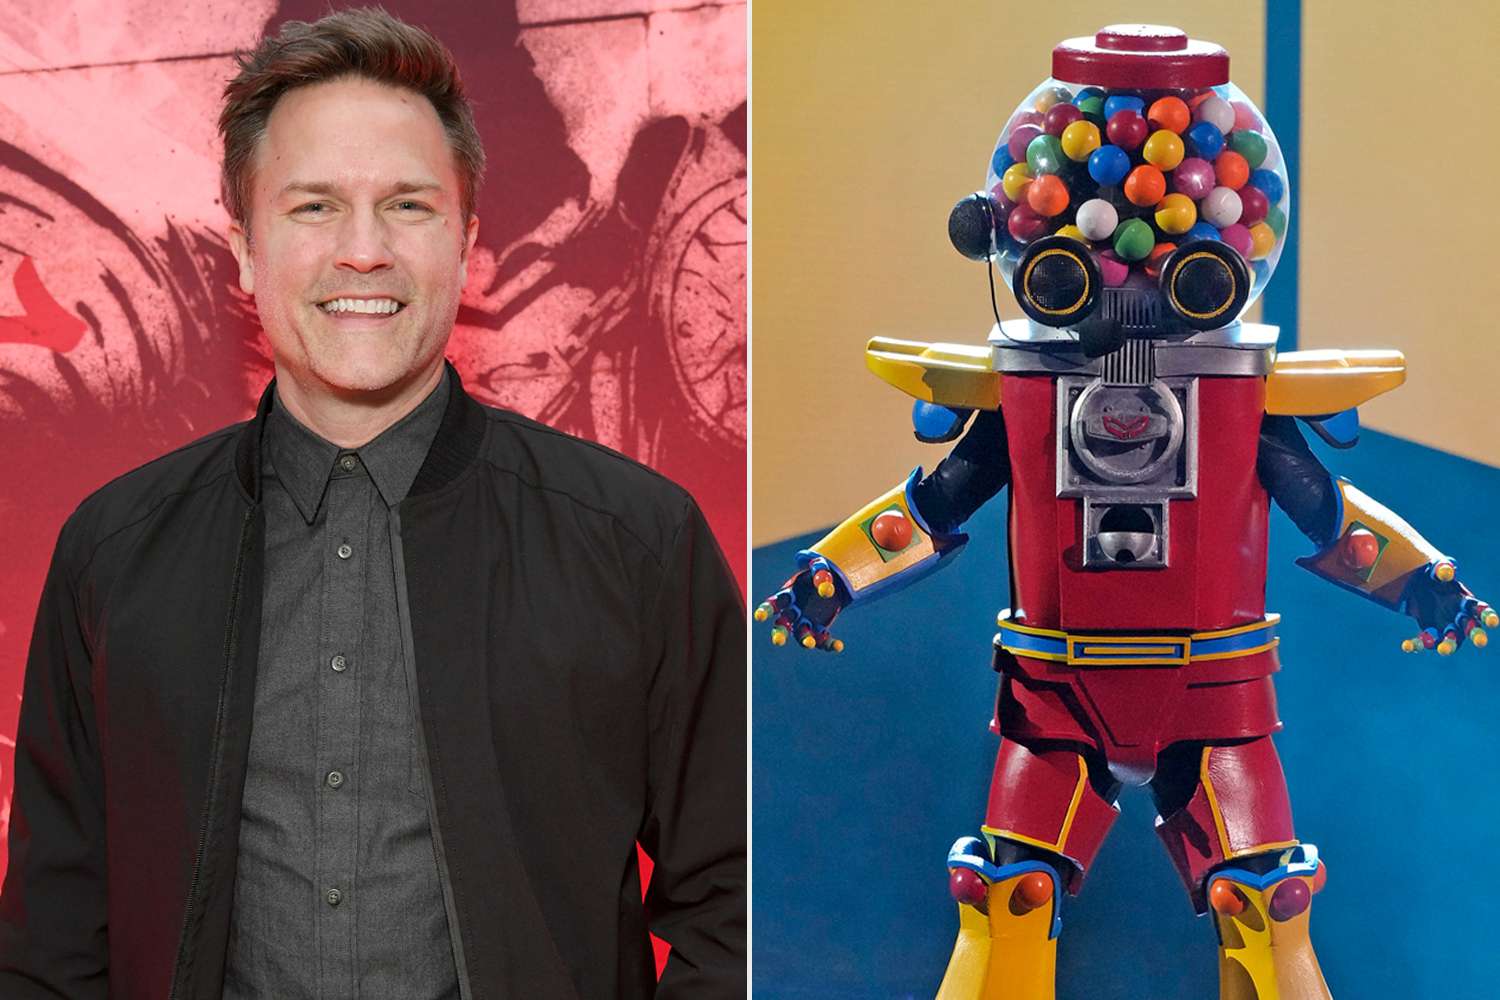 Scott Porter Says His 'Ginny & Georgia' Costars Recognized Him on as The Masked Singer's Gumball Thanks to Cast Karaoke Nights...